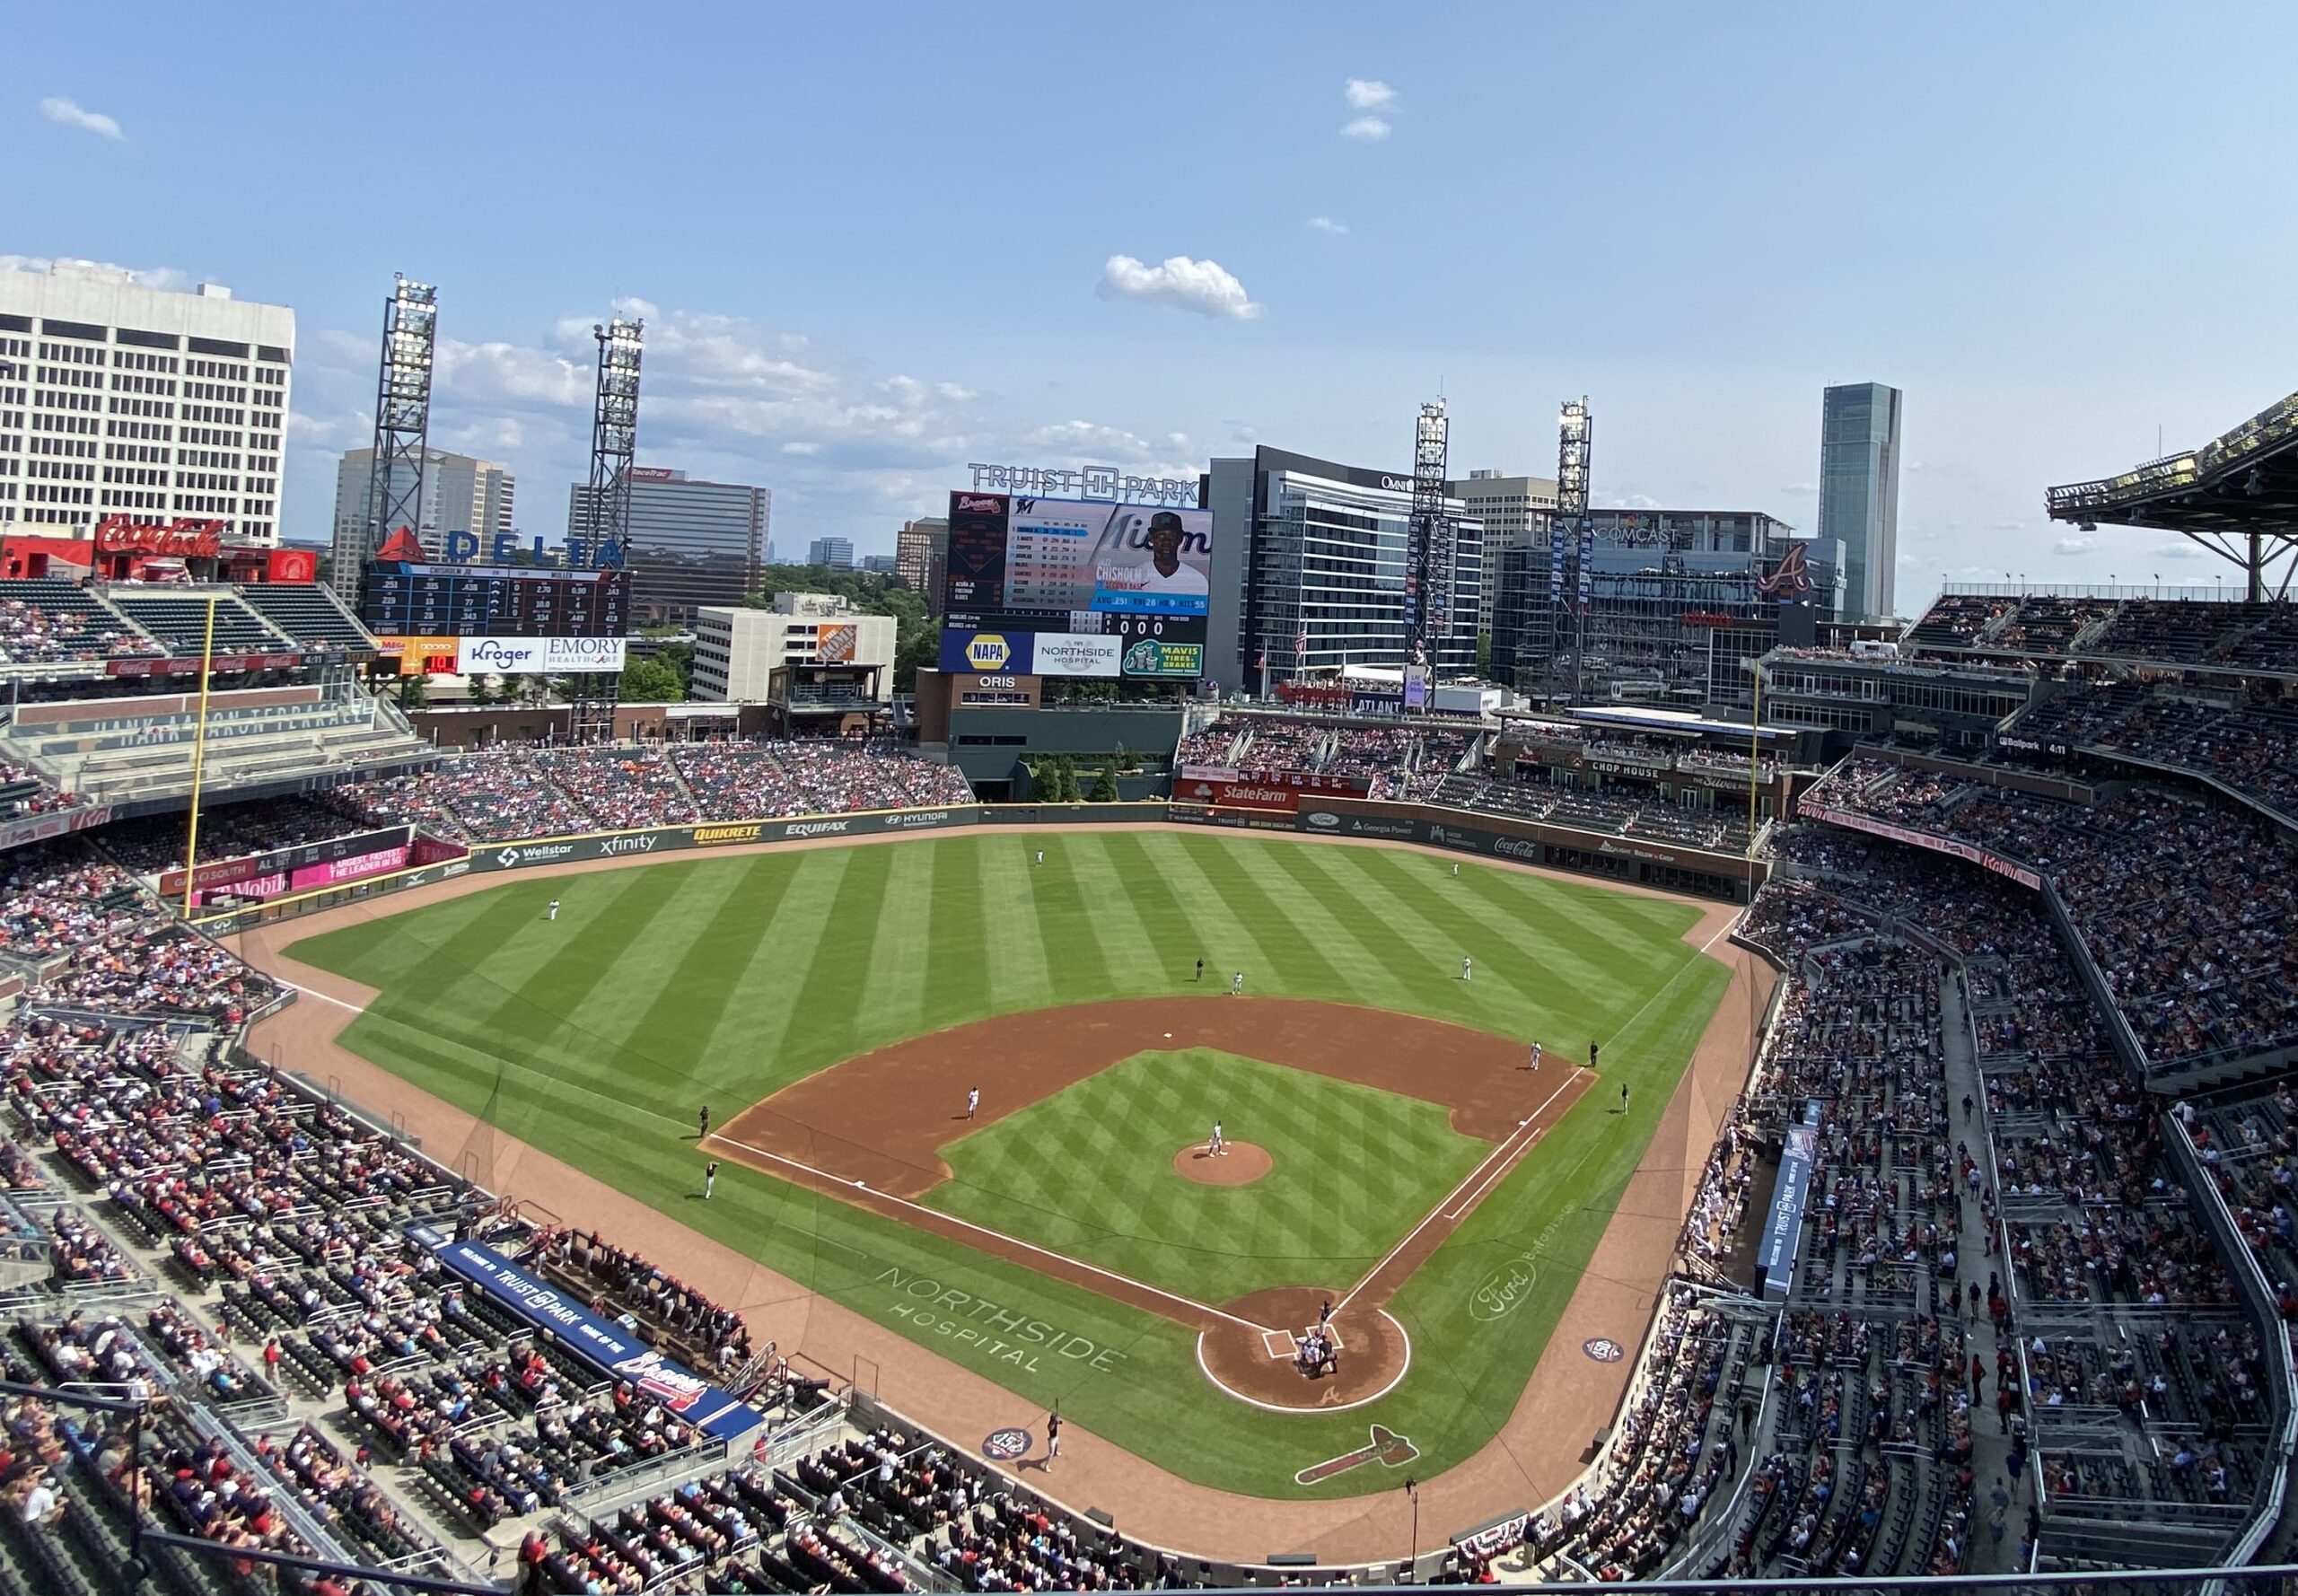 Truist Park - pictures, information and more of the Atlanta Braves